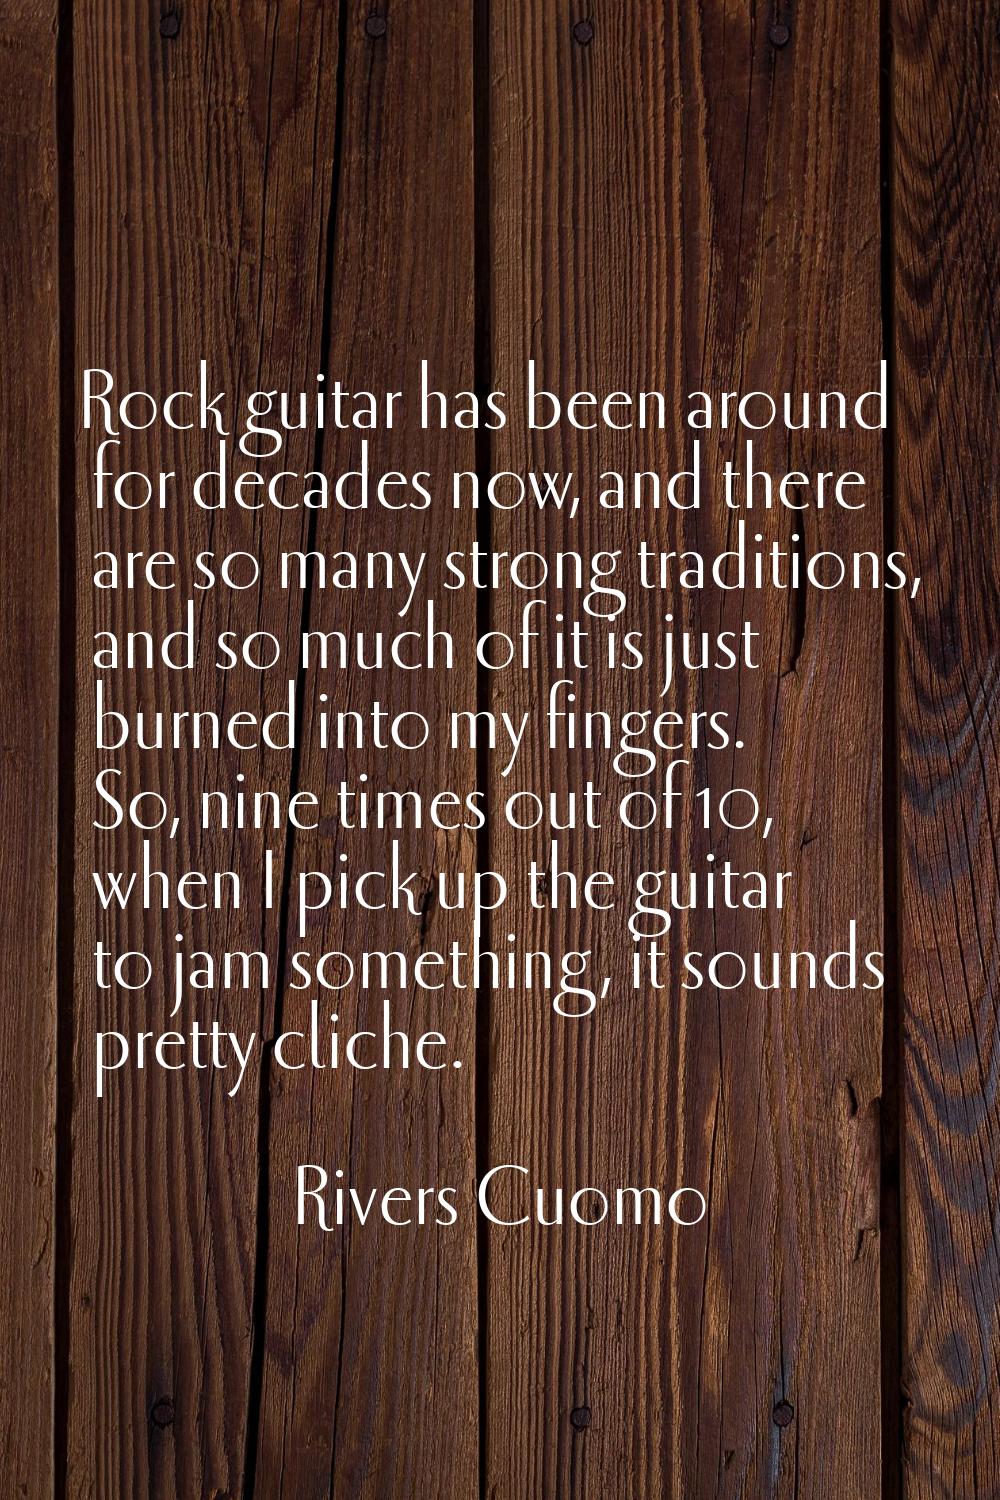 Rock guitar has been around for decades now, and there are so many strong traditions, and so much o